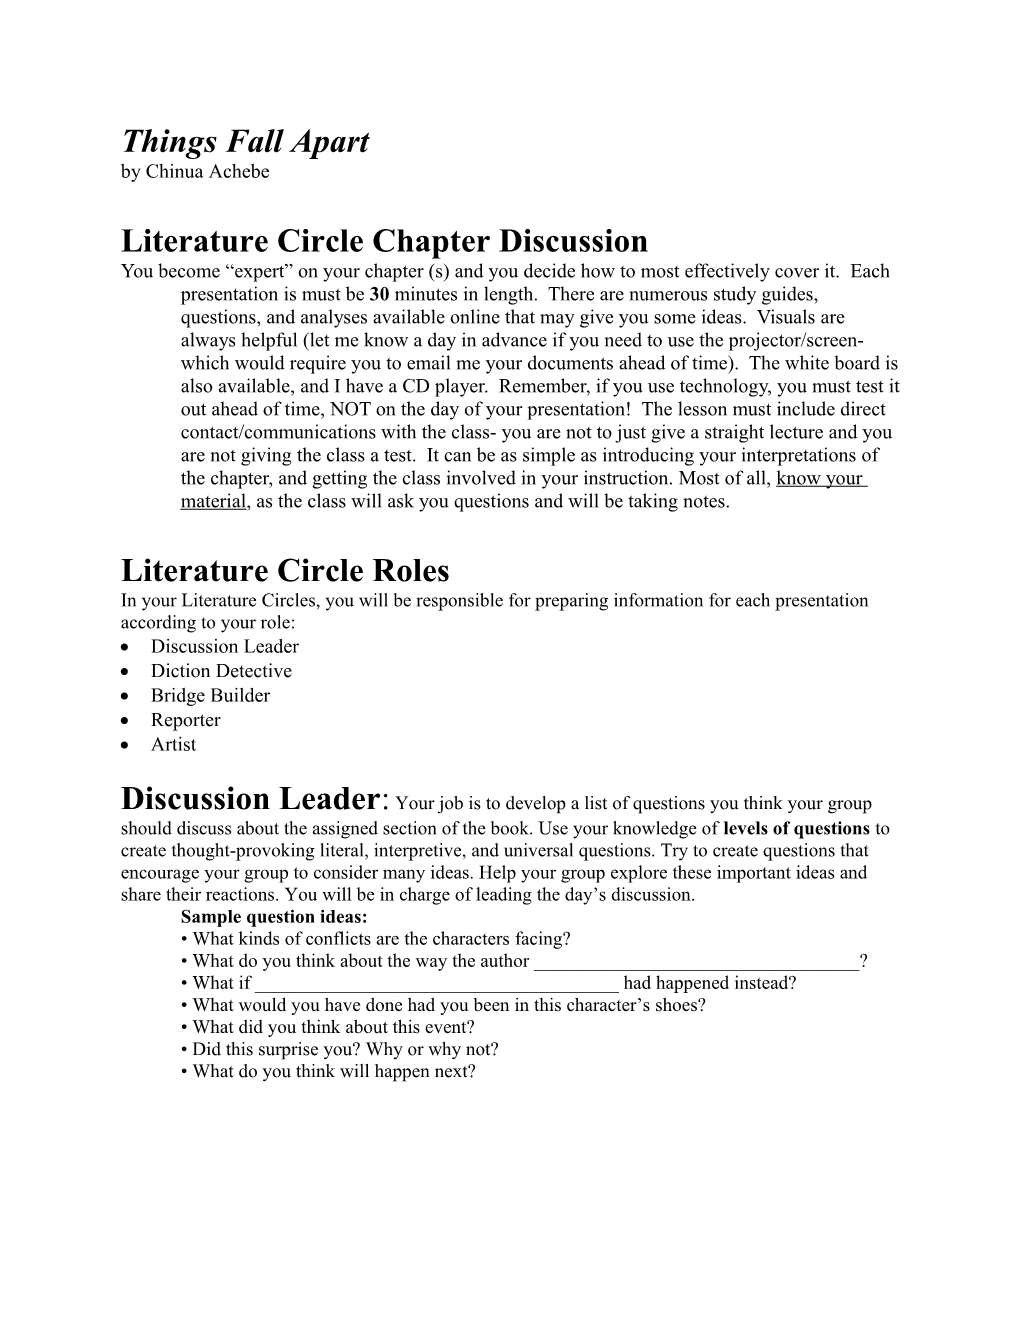 Literature Circle Chapter Discussion